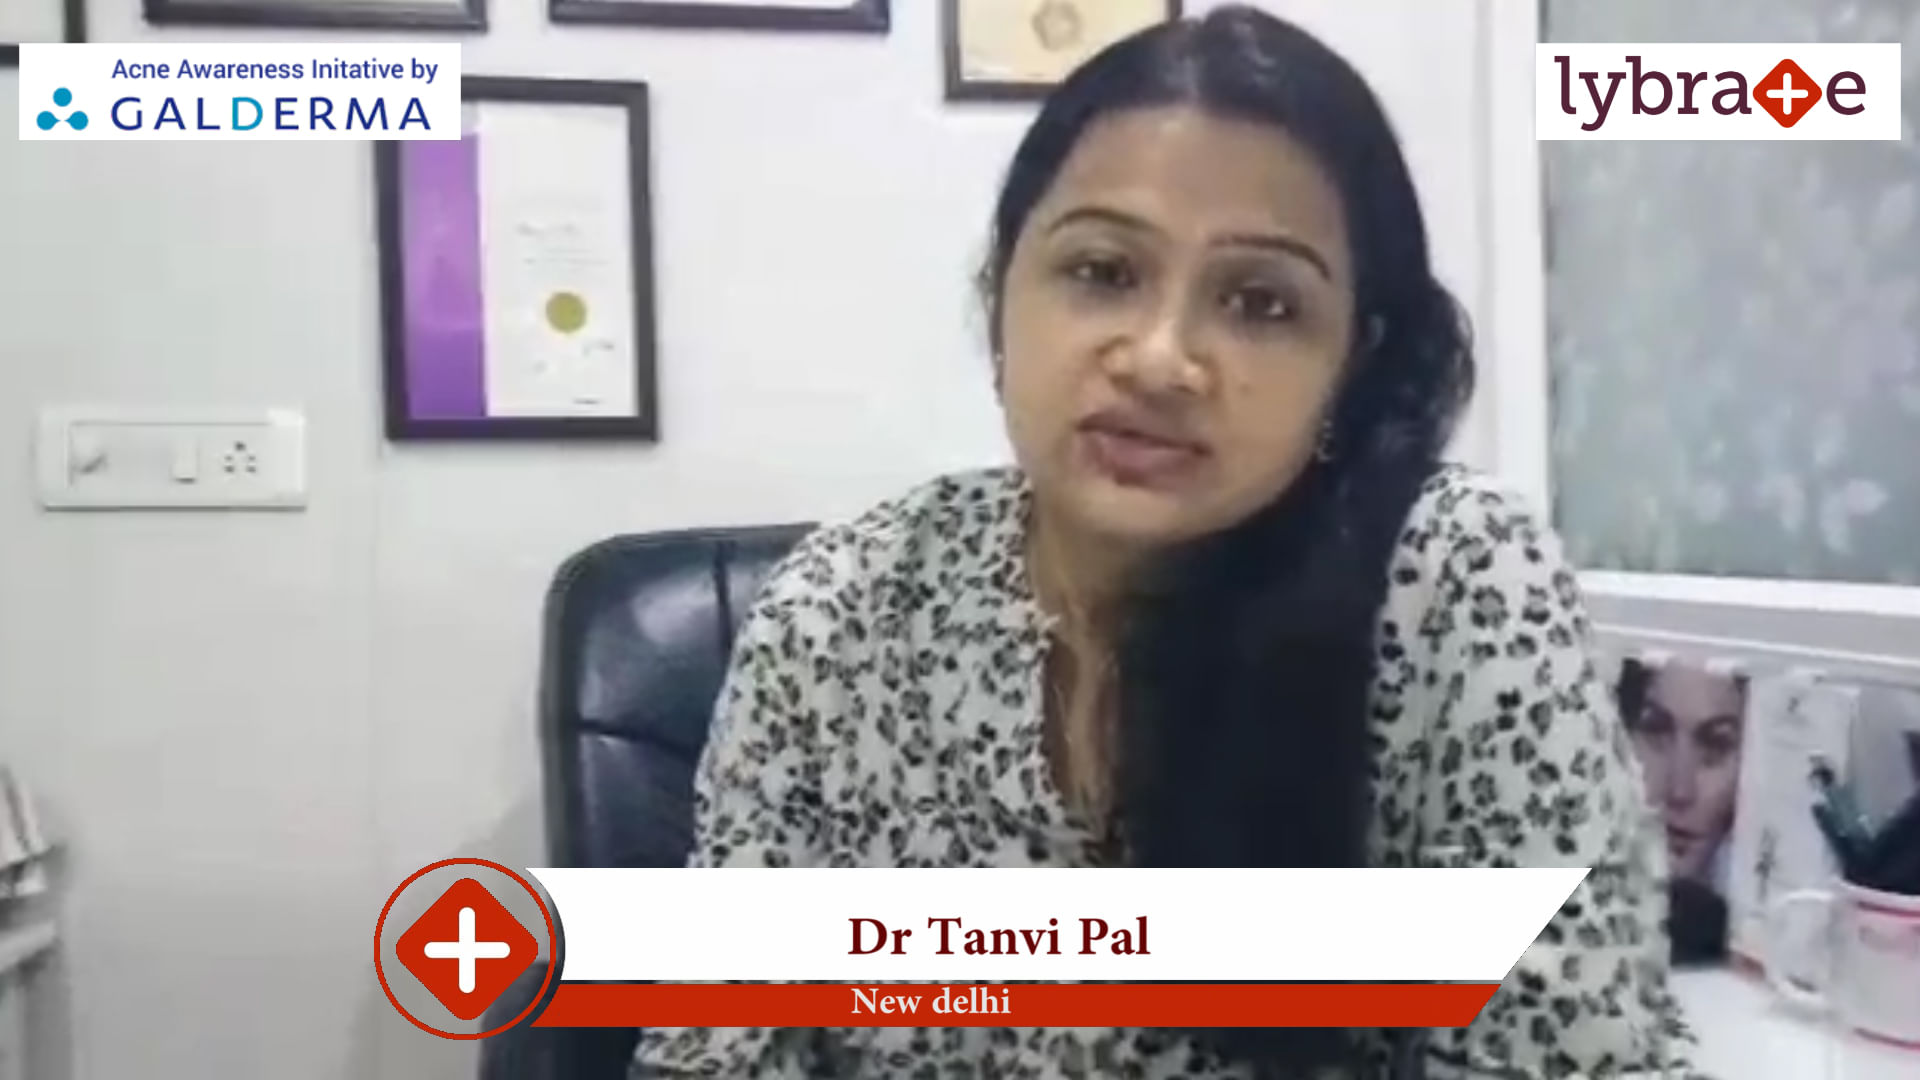 Lybrate | Dr. Tanvi Pal speaks on IMPORTANCE OF TREATING ACNE EARLY